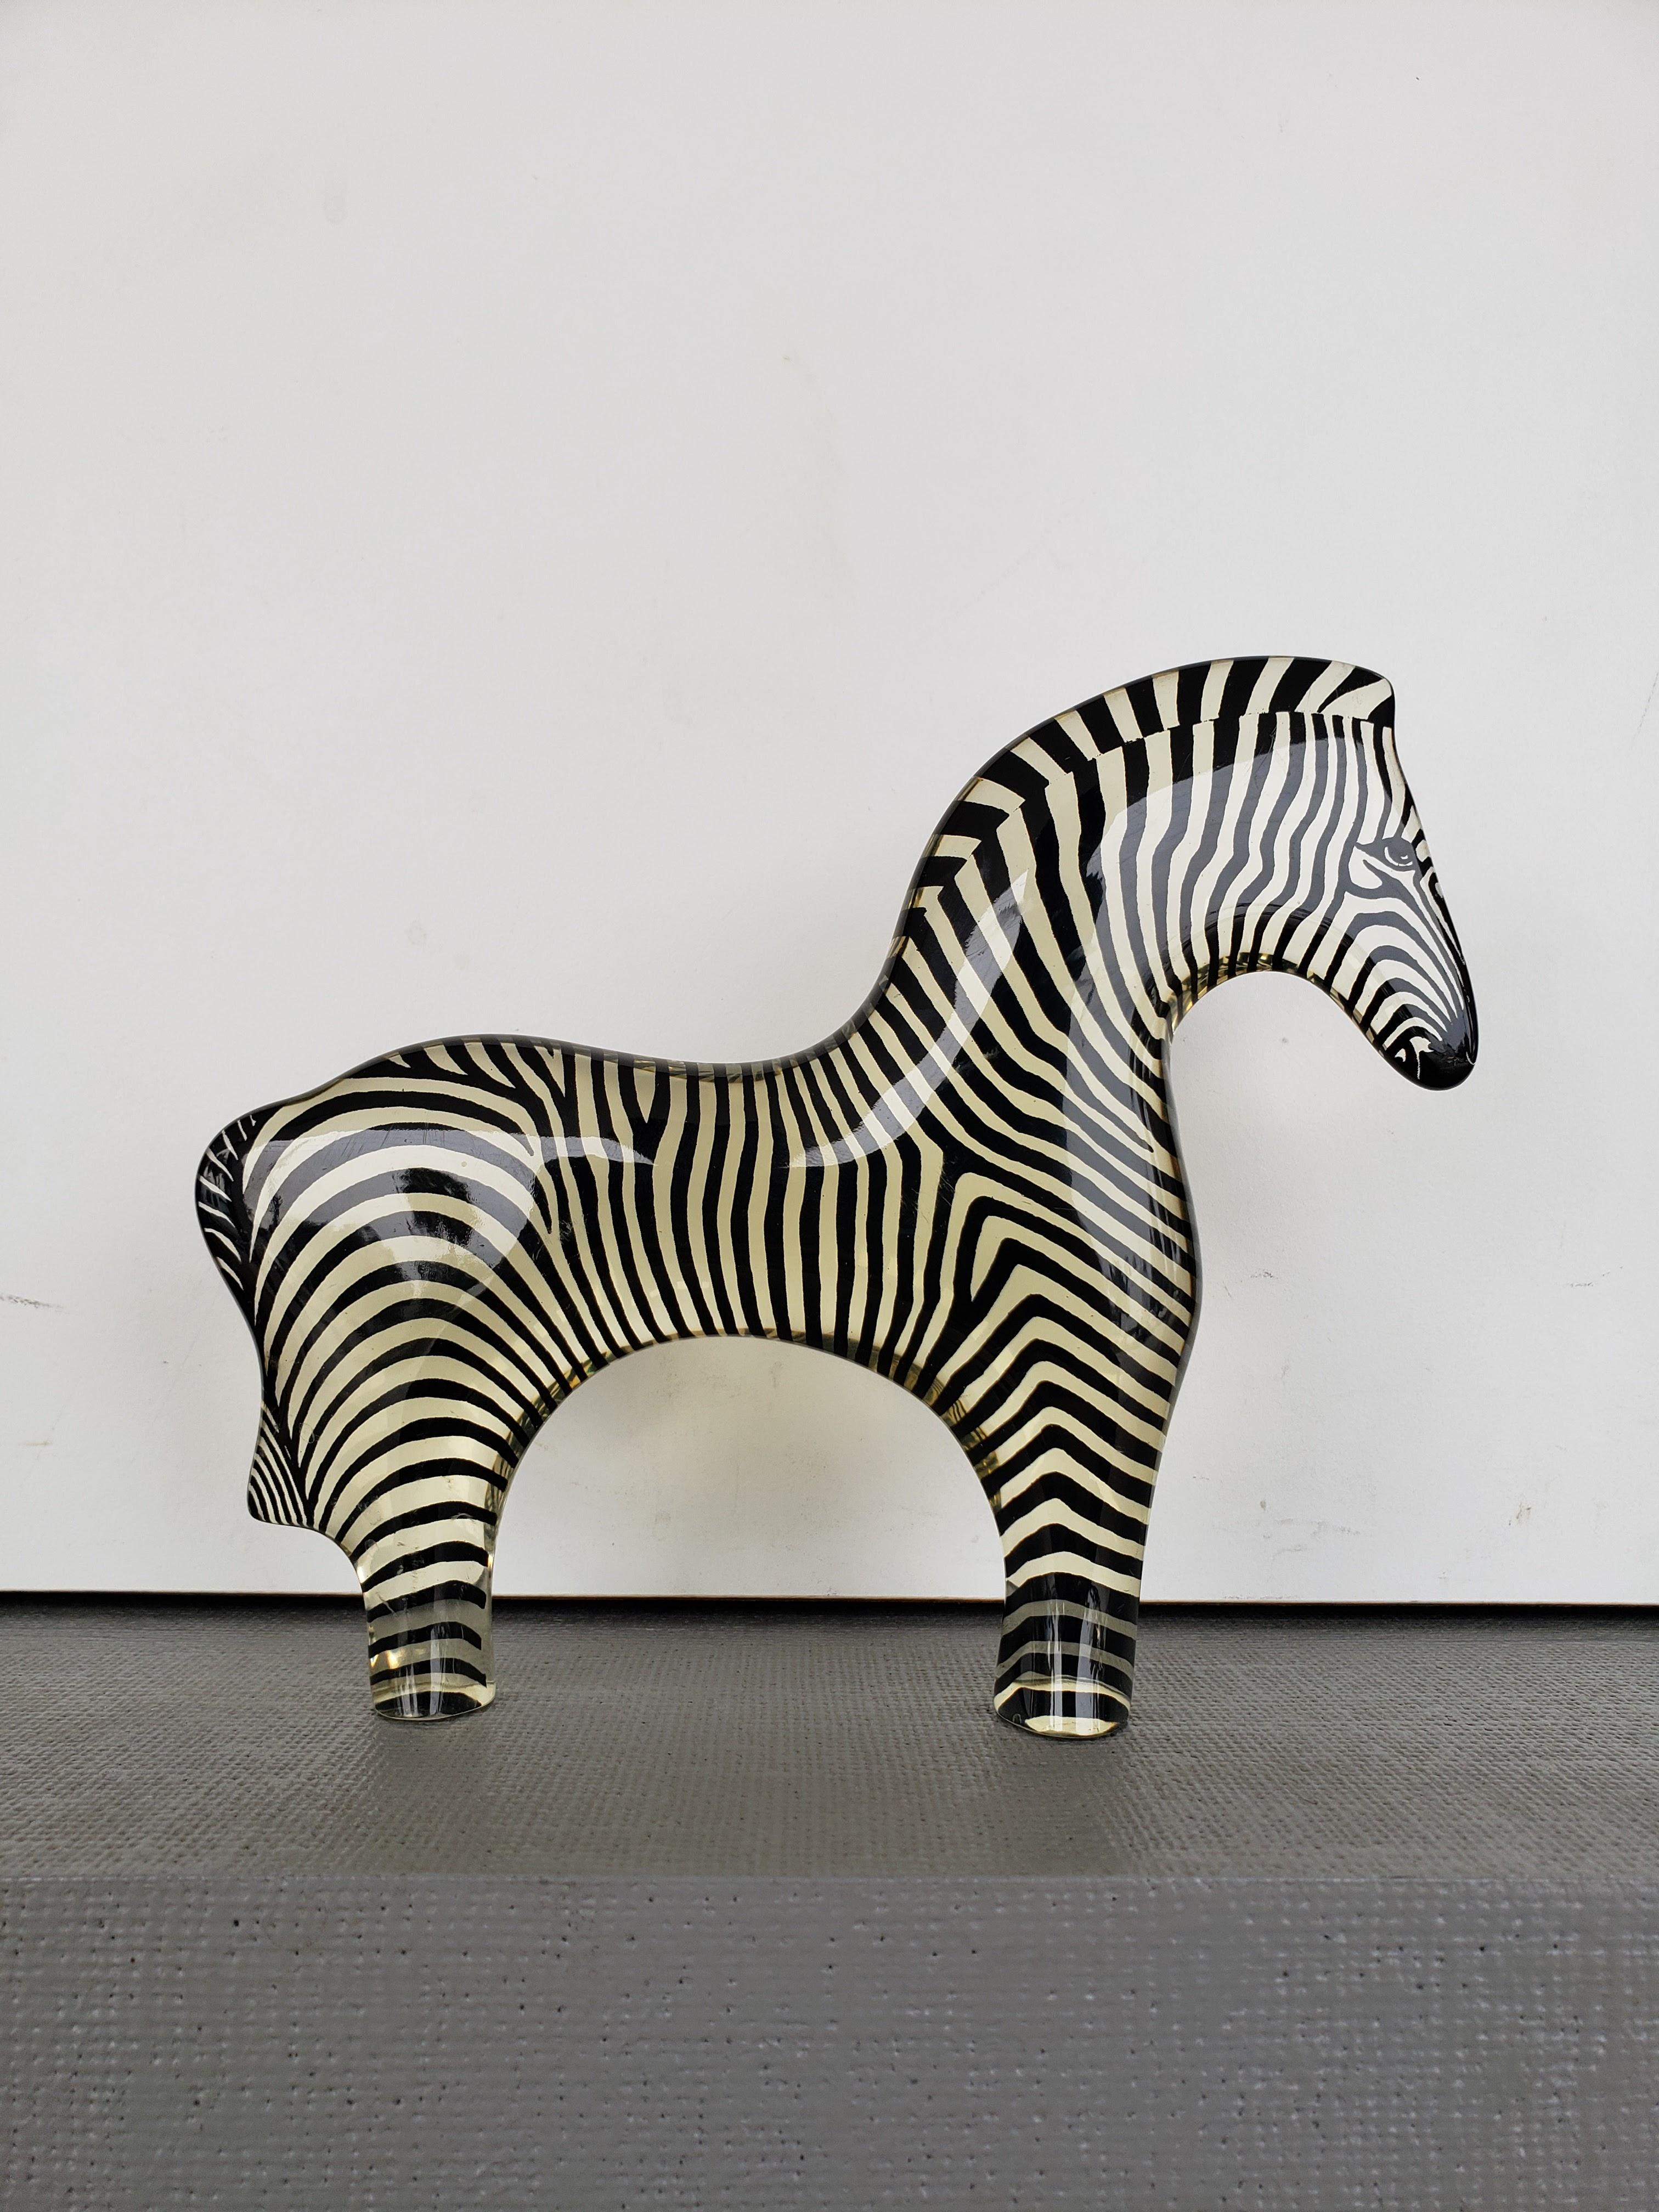 Abraham Palatnik lucite sculpture of a Zebra.  In excellent condition with no issues to report.

Great example of Op Art sculpture from a well known Brazilian artist.  